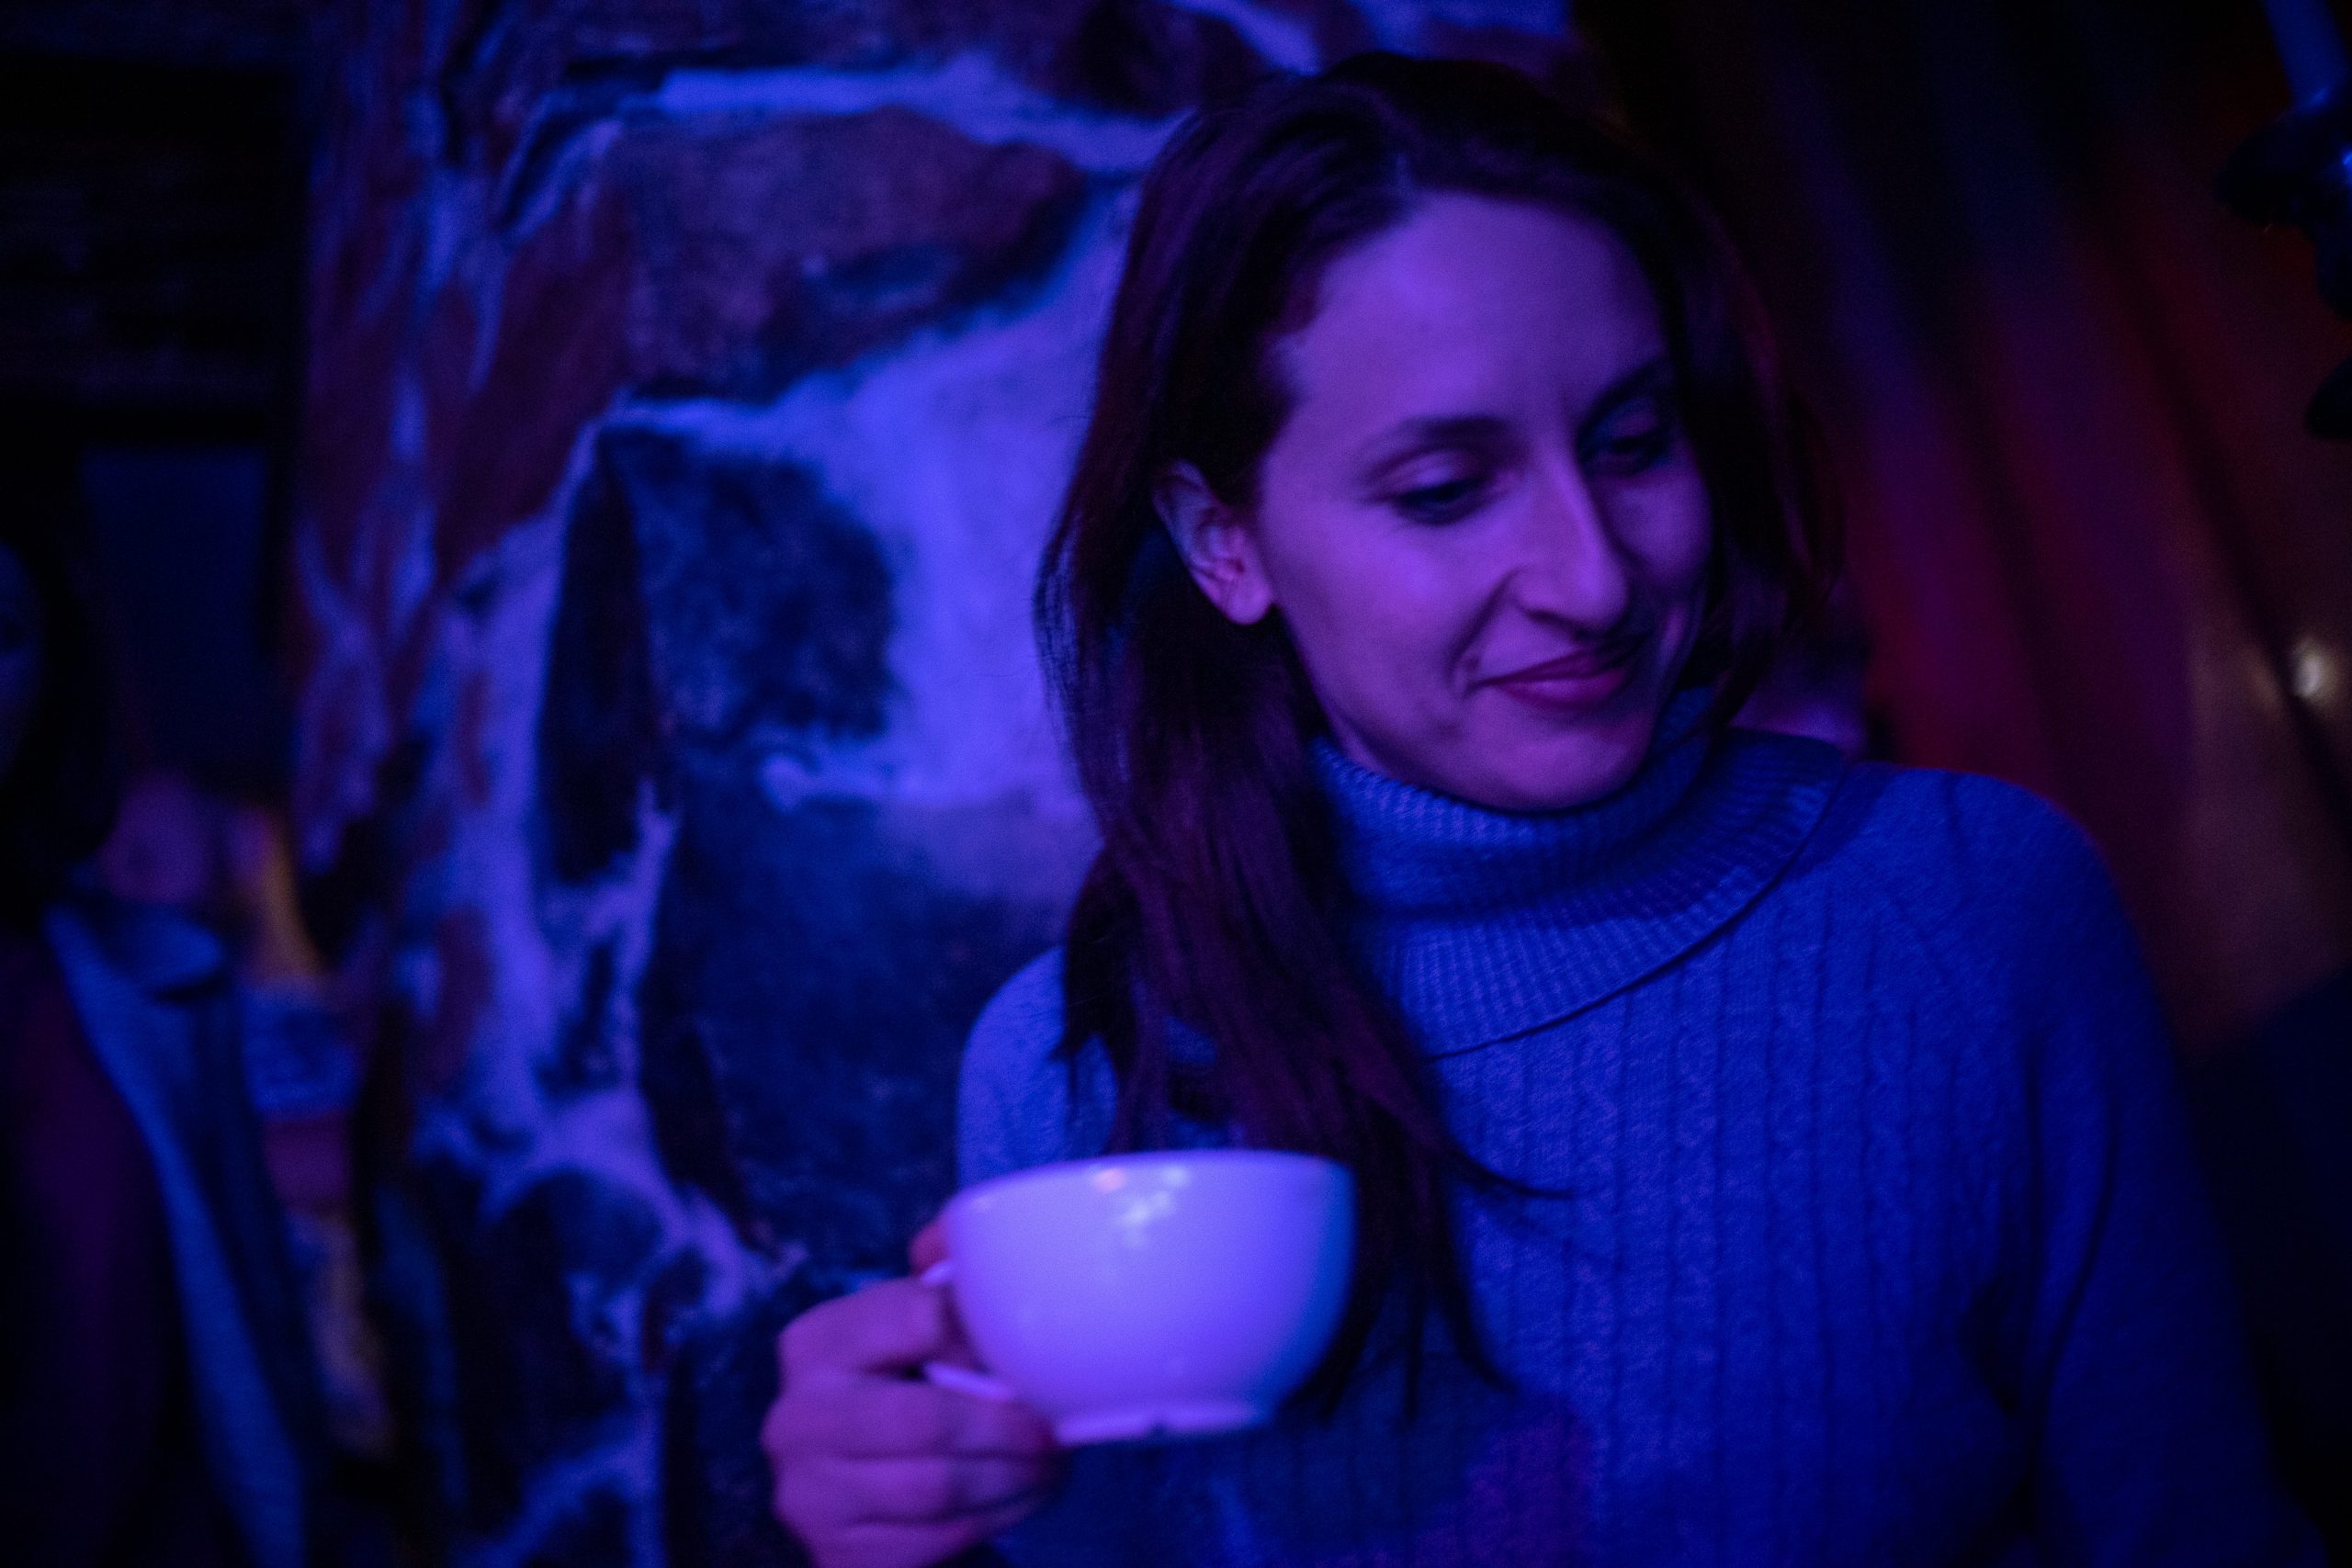 A woman glances down as she holds a teacup in one hand.